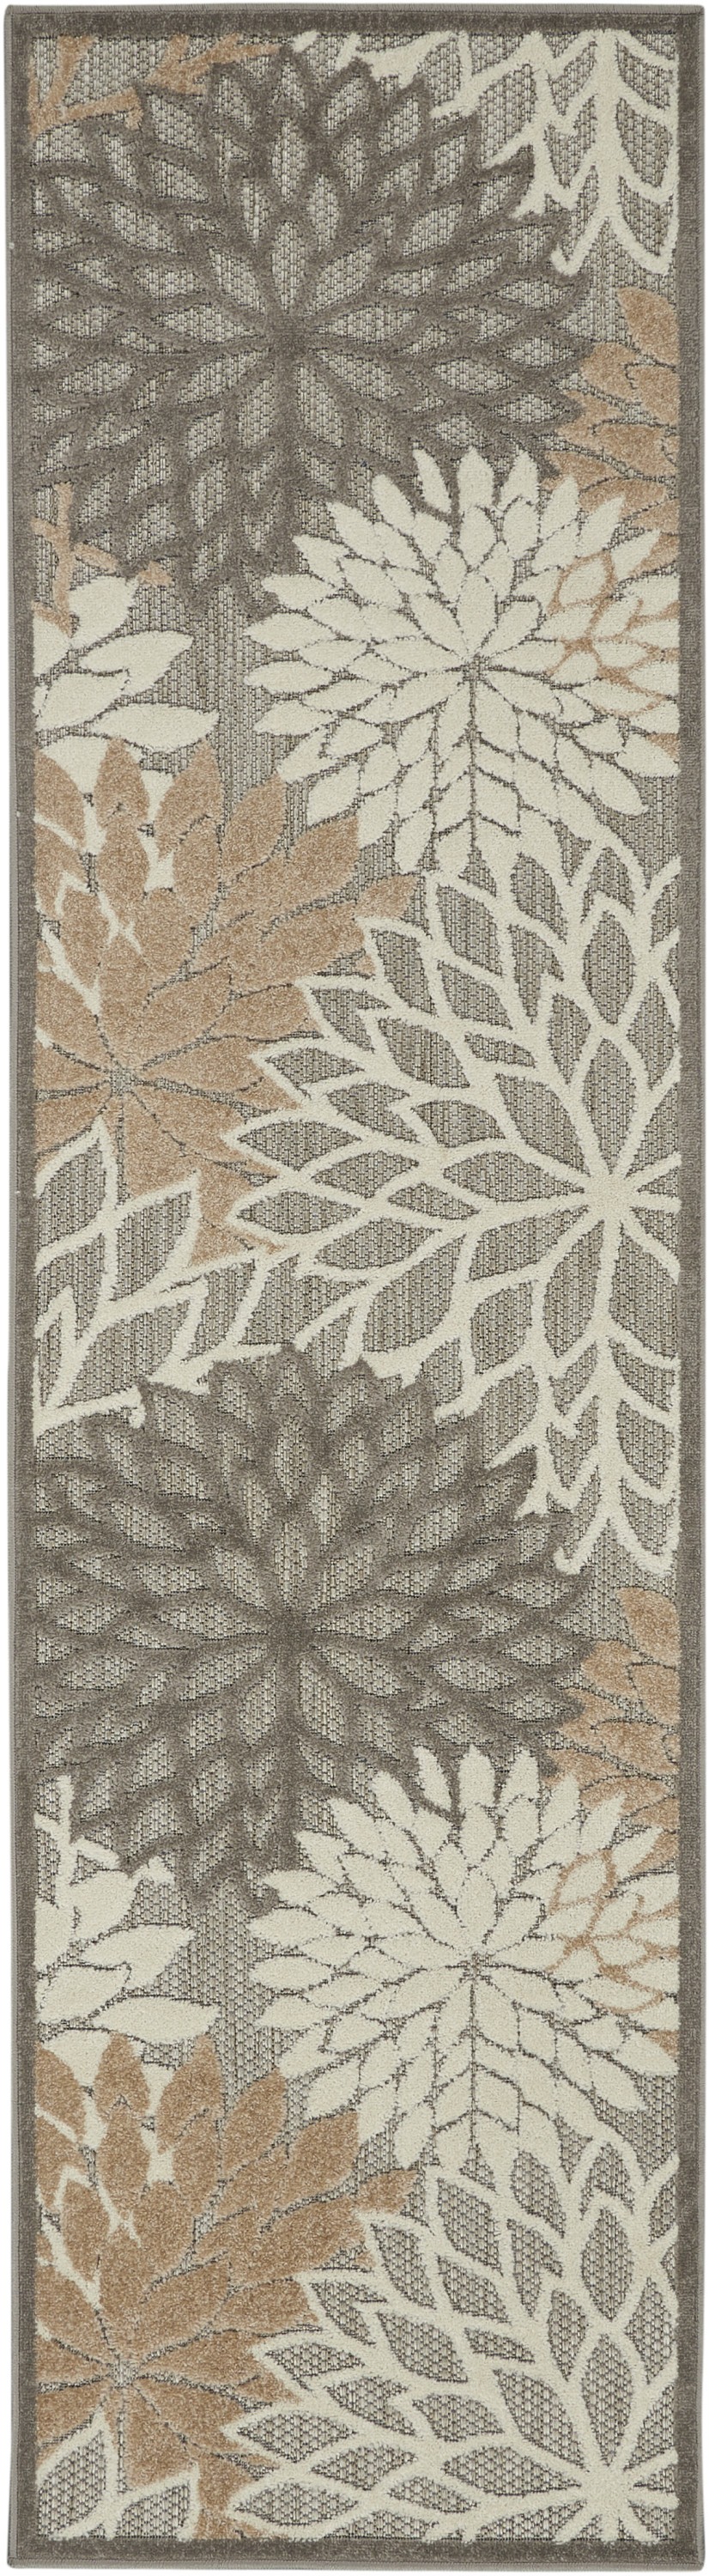 2' X 8' Gray And Ivory Floral Indoor Outdoor Area Rug-384650-1